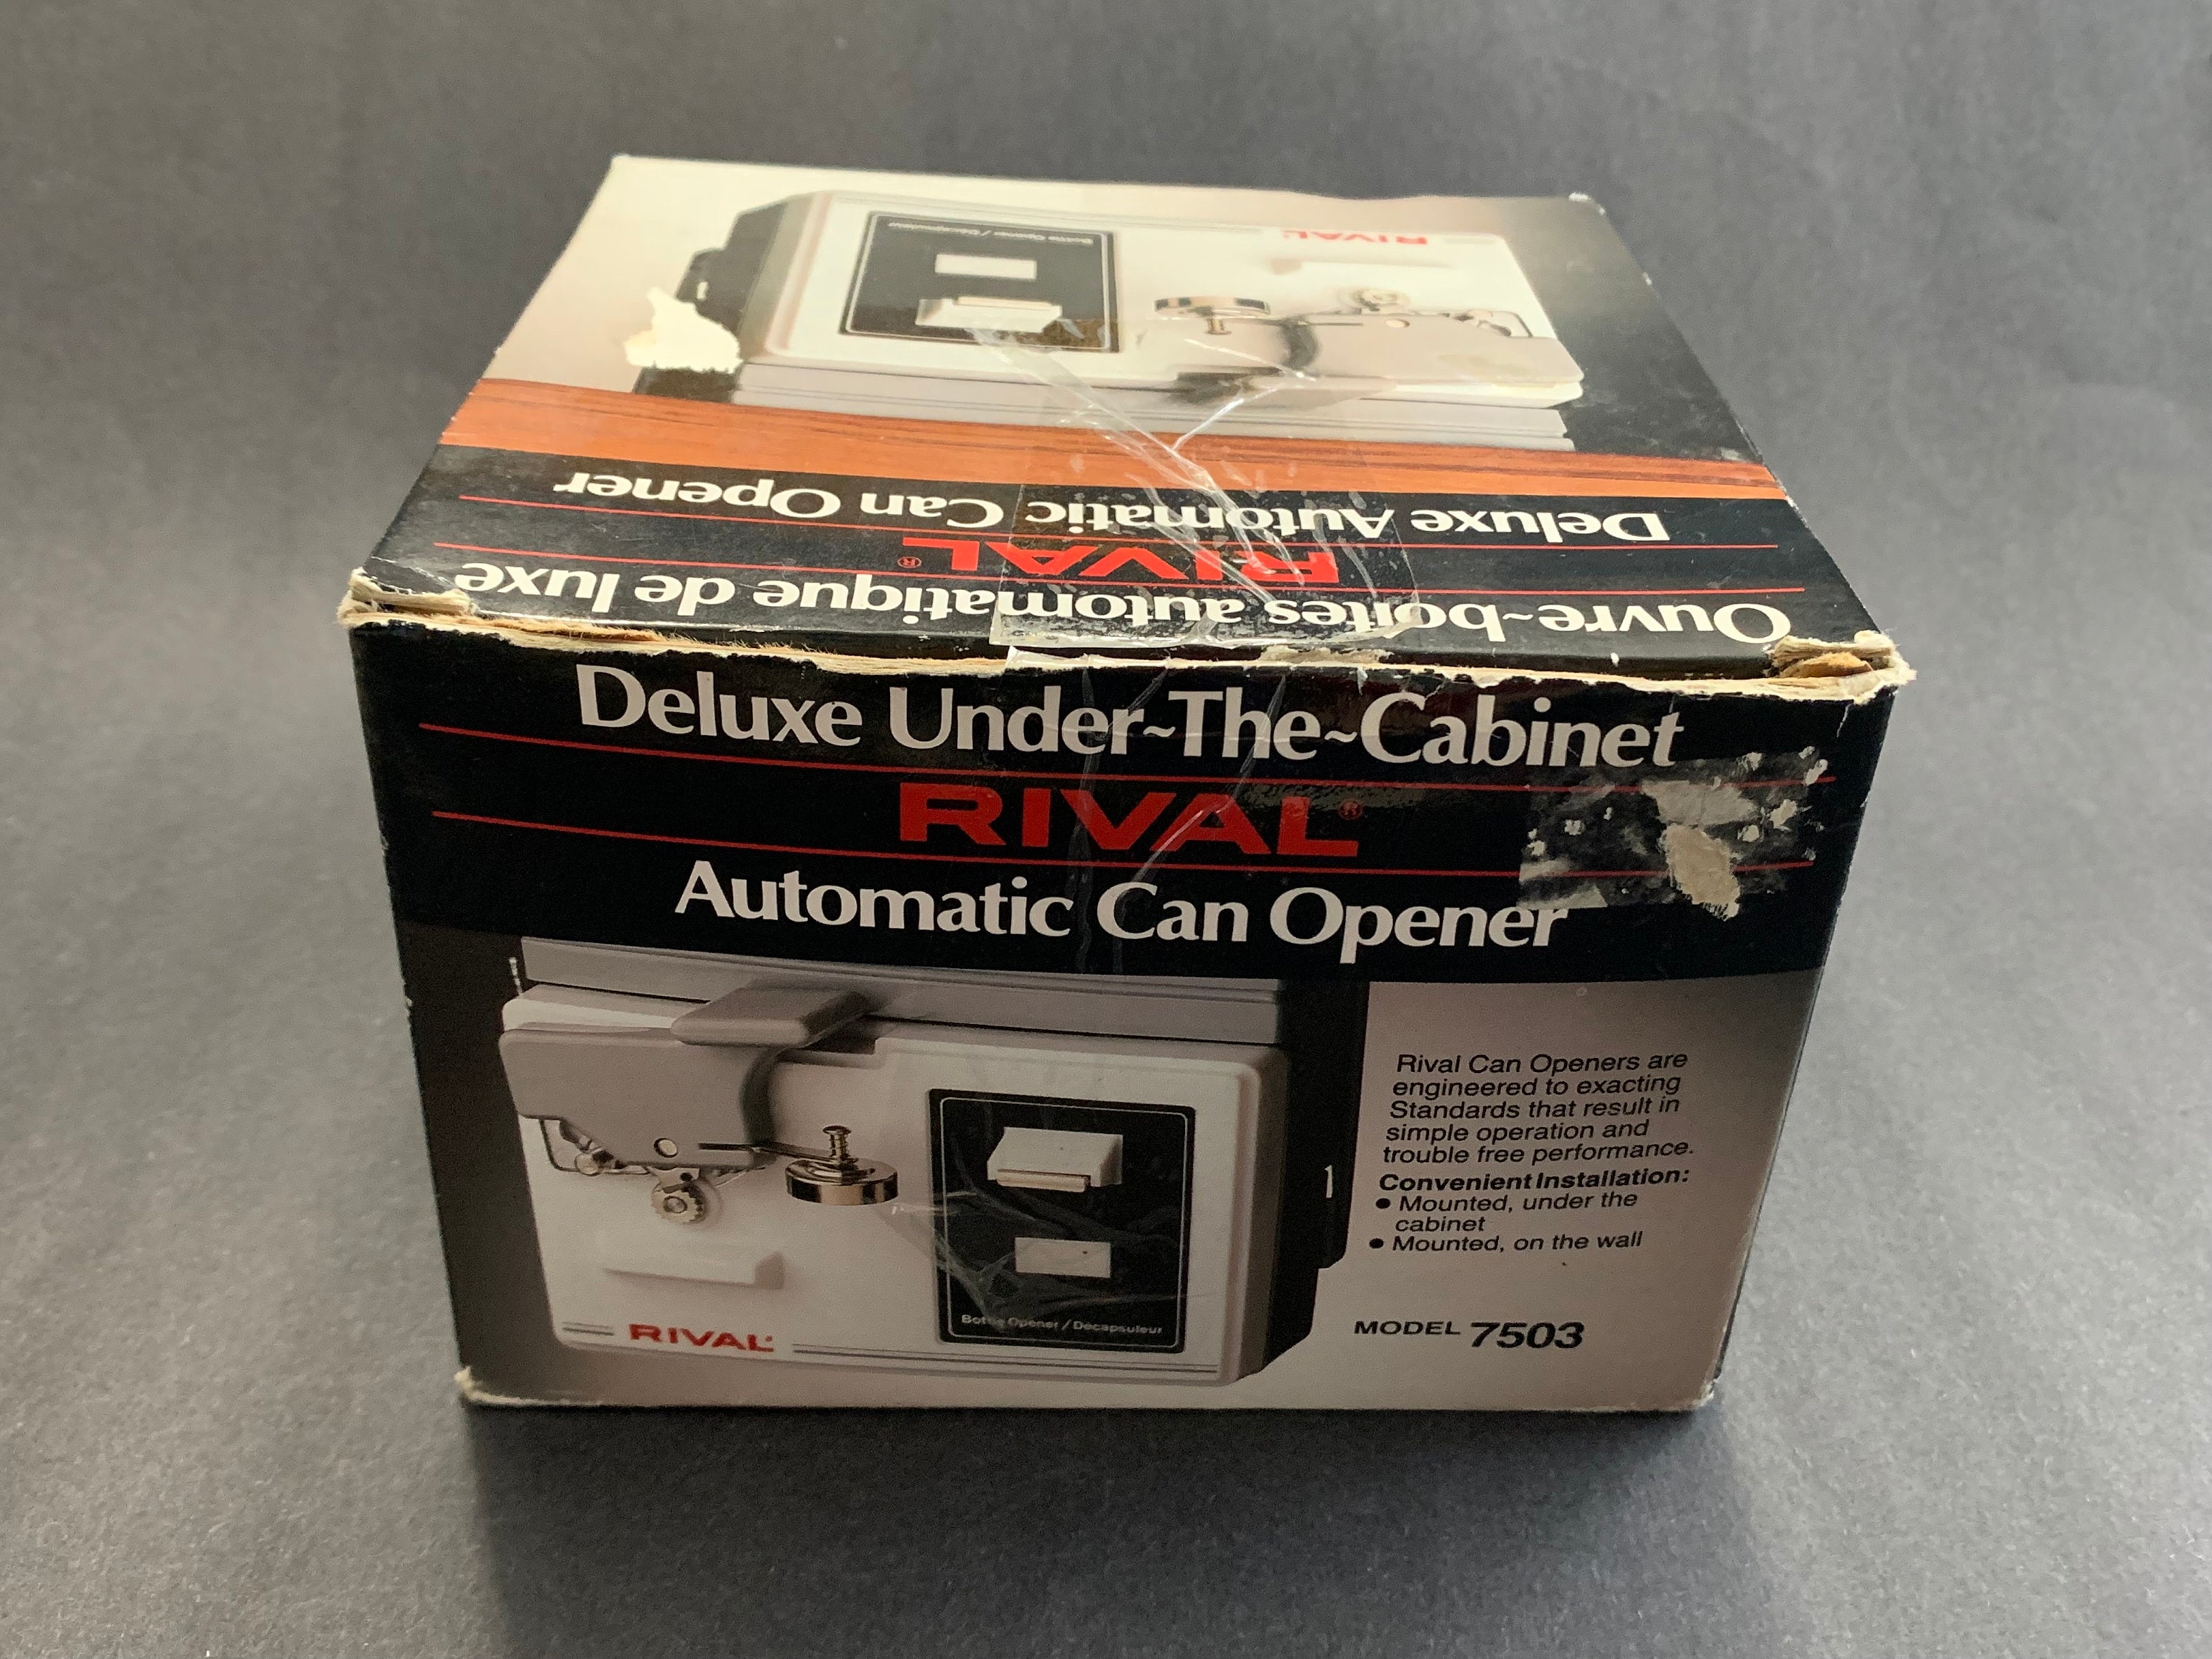 RIVAL Deluxe Under the Cabinet Automatic Can Opener Model 7503 Brand New  Open Box Mounting Guide and Hardware Included 